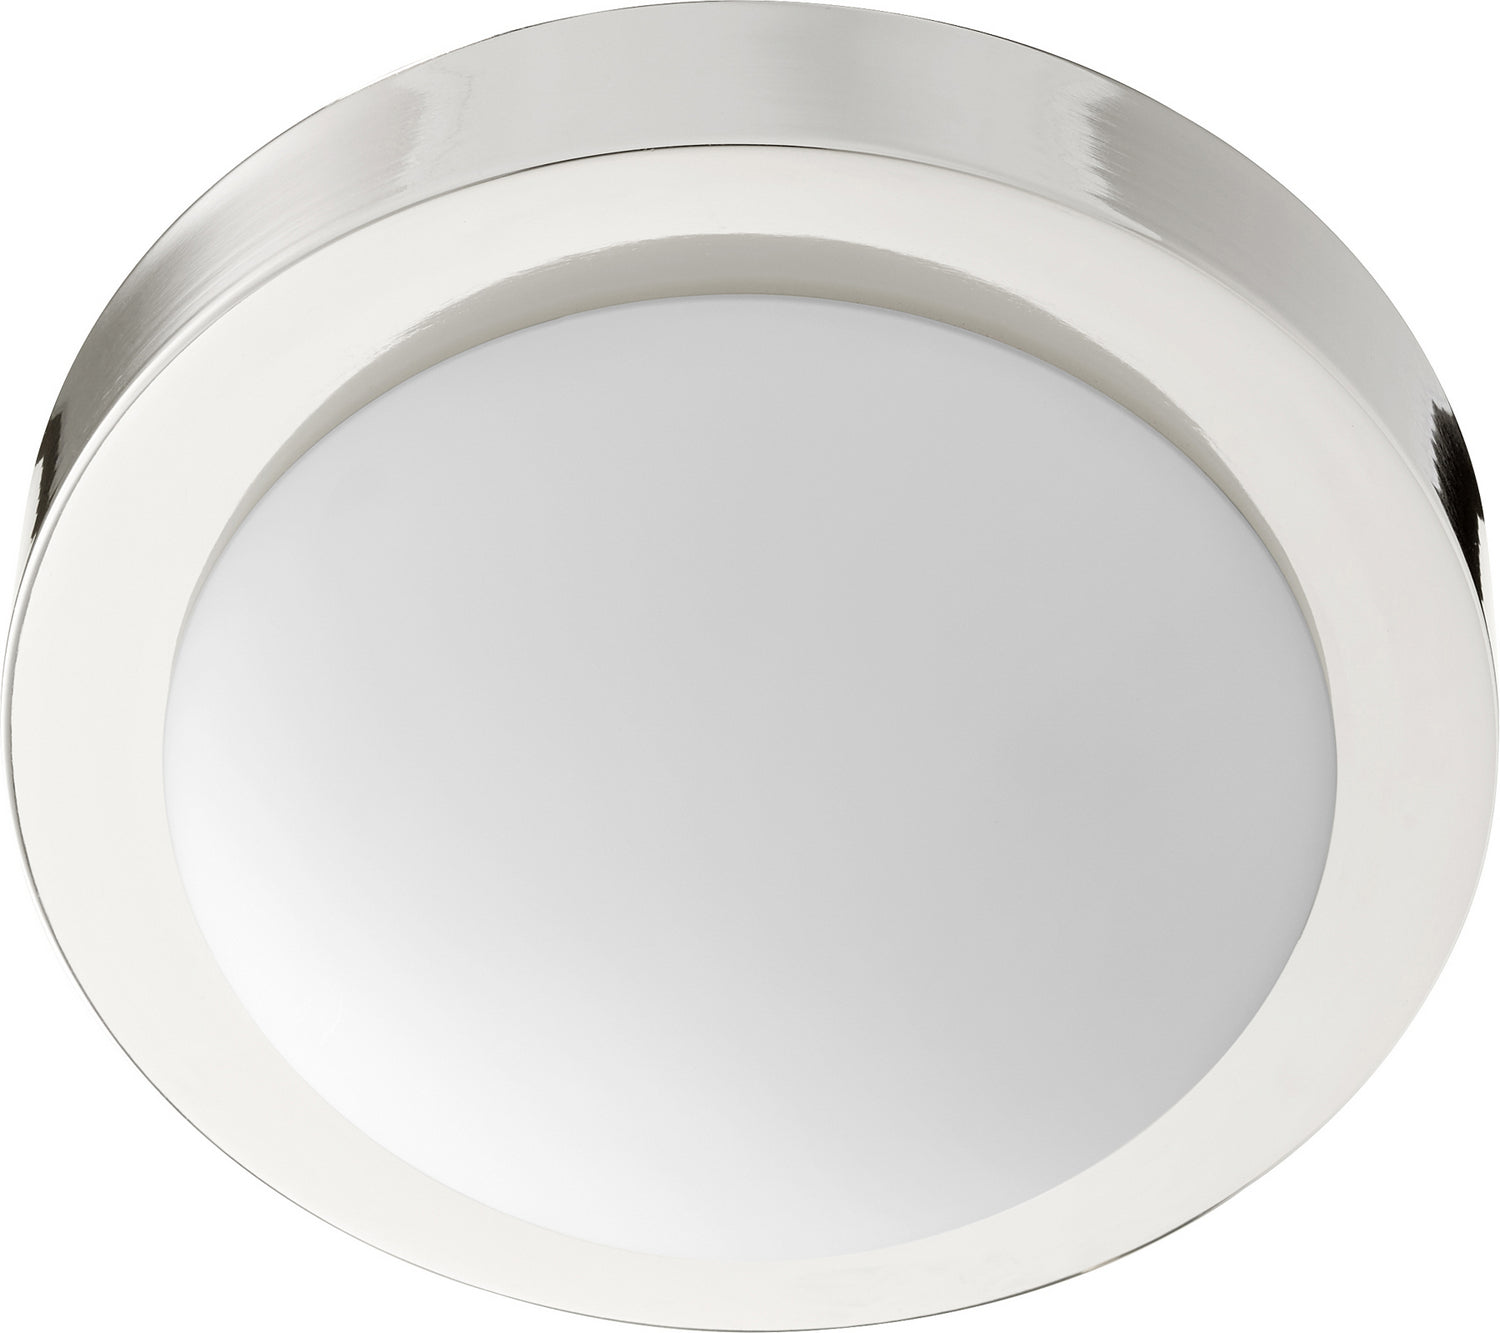 Quorum - 3505-9-62 - One Light Ceiling Mount - 3505 Contempo Ceiling Mounts - Polished Nickel